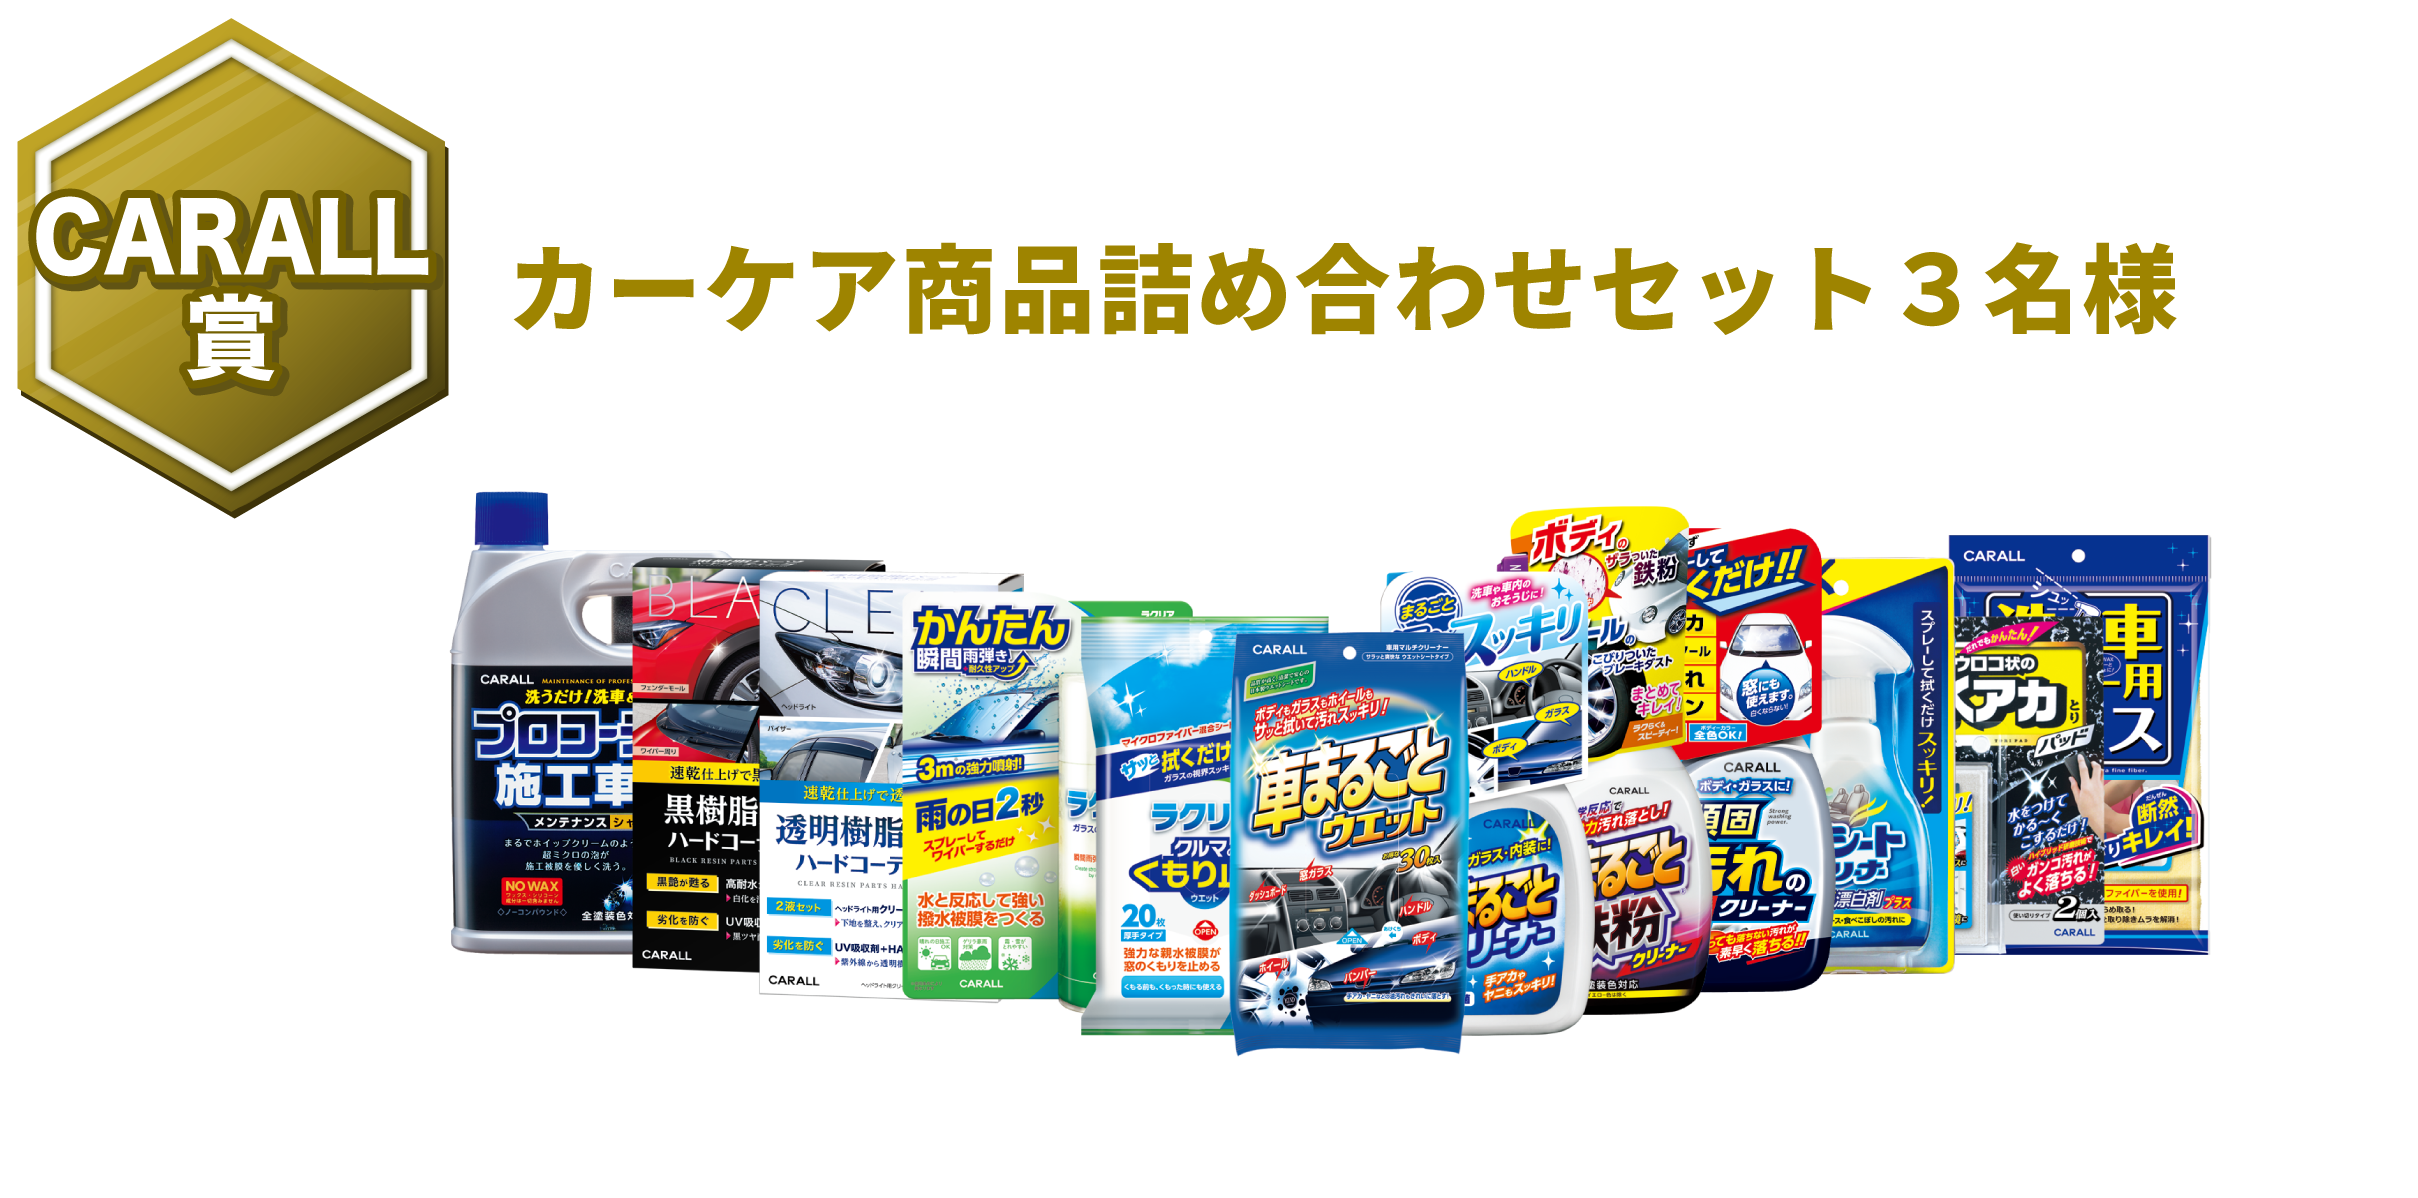 carall賞 カーケア商品詰め合わせセット３名様